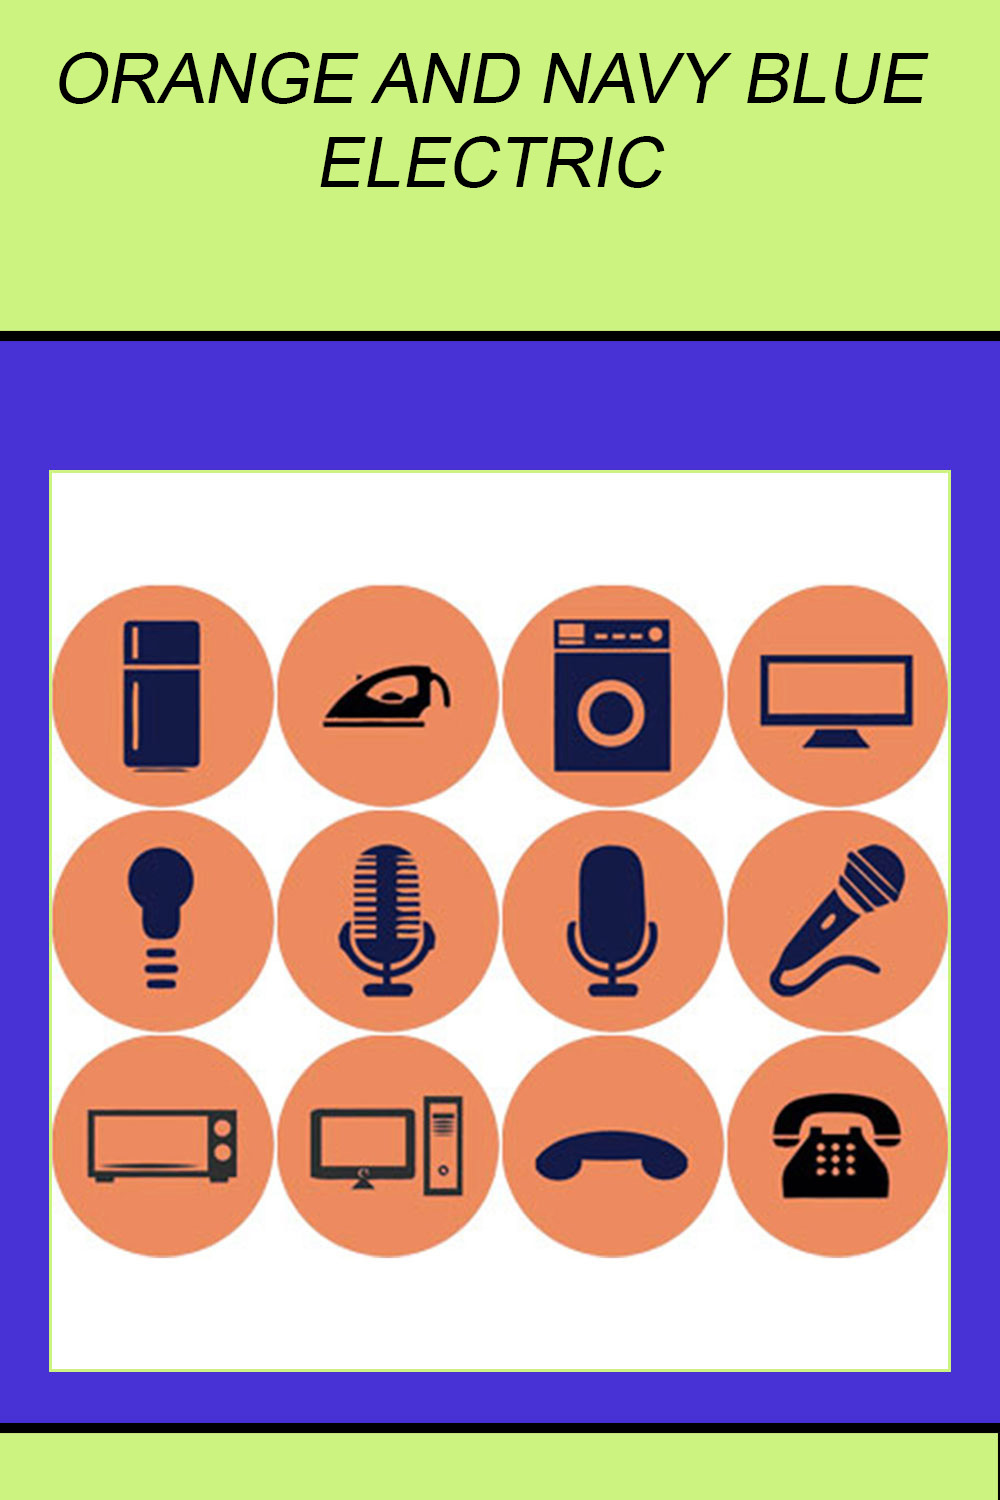 ORANGE AND NAVY BLUE ELECTRIC ROUND ICONS pinterest preview image.